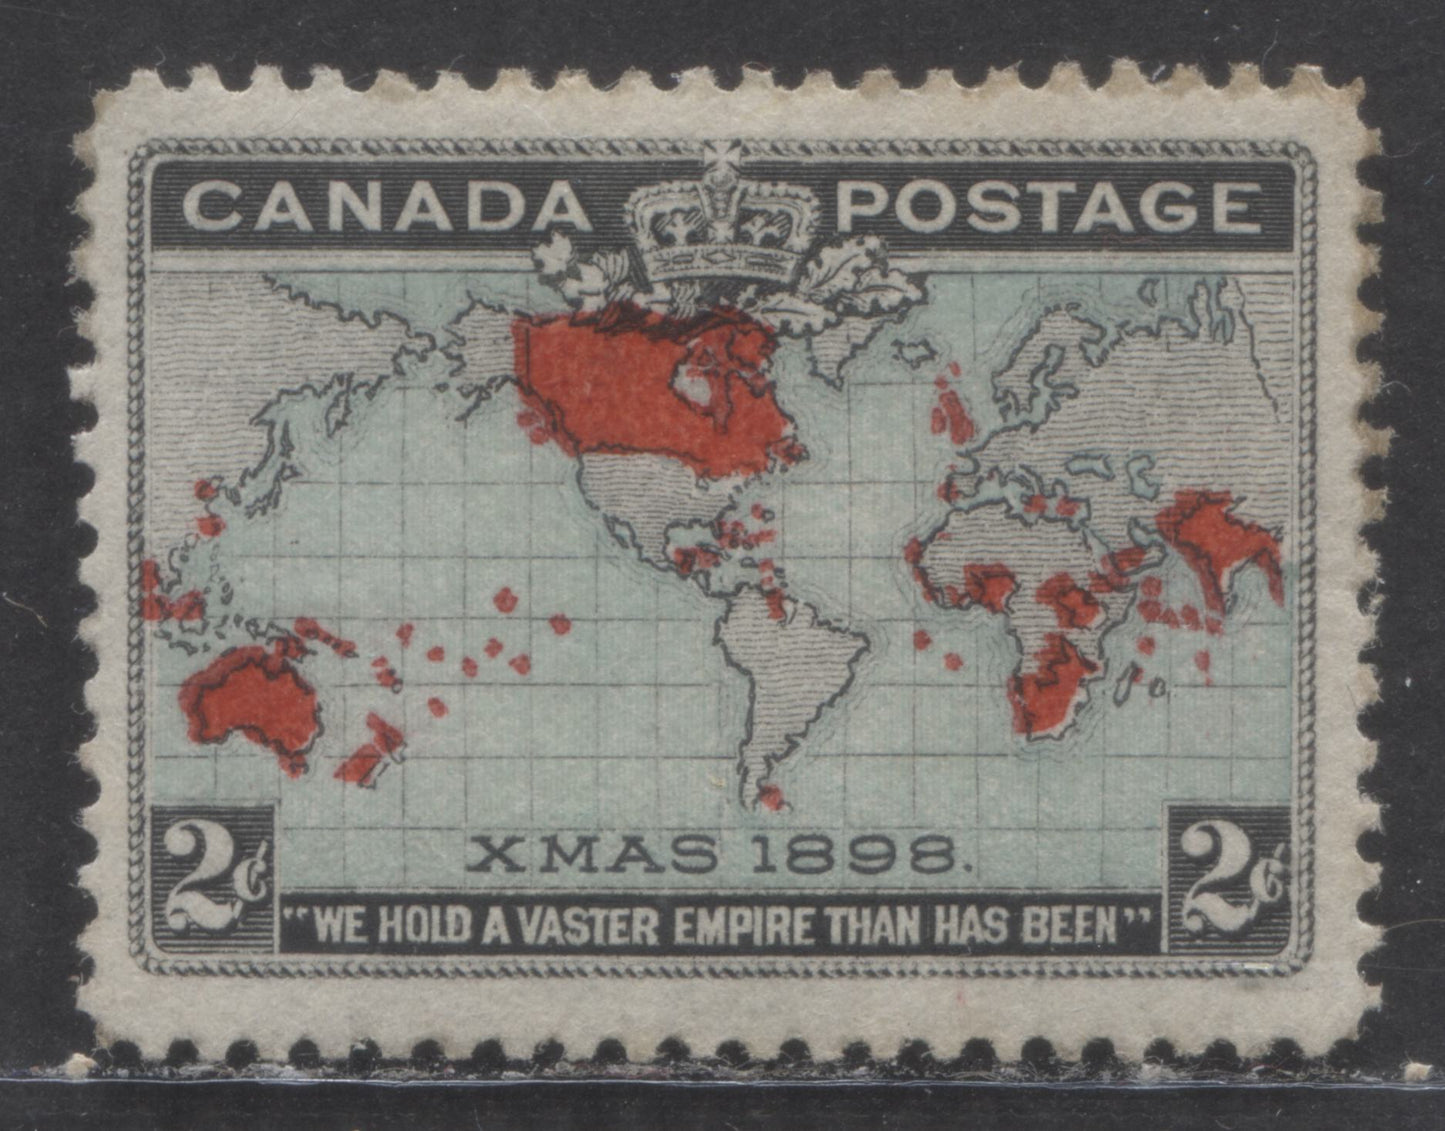 Lot 9 Canada #86var 2c Black, Blue & Carmine Mercator's Projection, 1898 Imperial Penny Postage, A FOG Single With Minor Re-entry In C Of Postage, Redistributed Gum